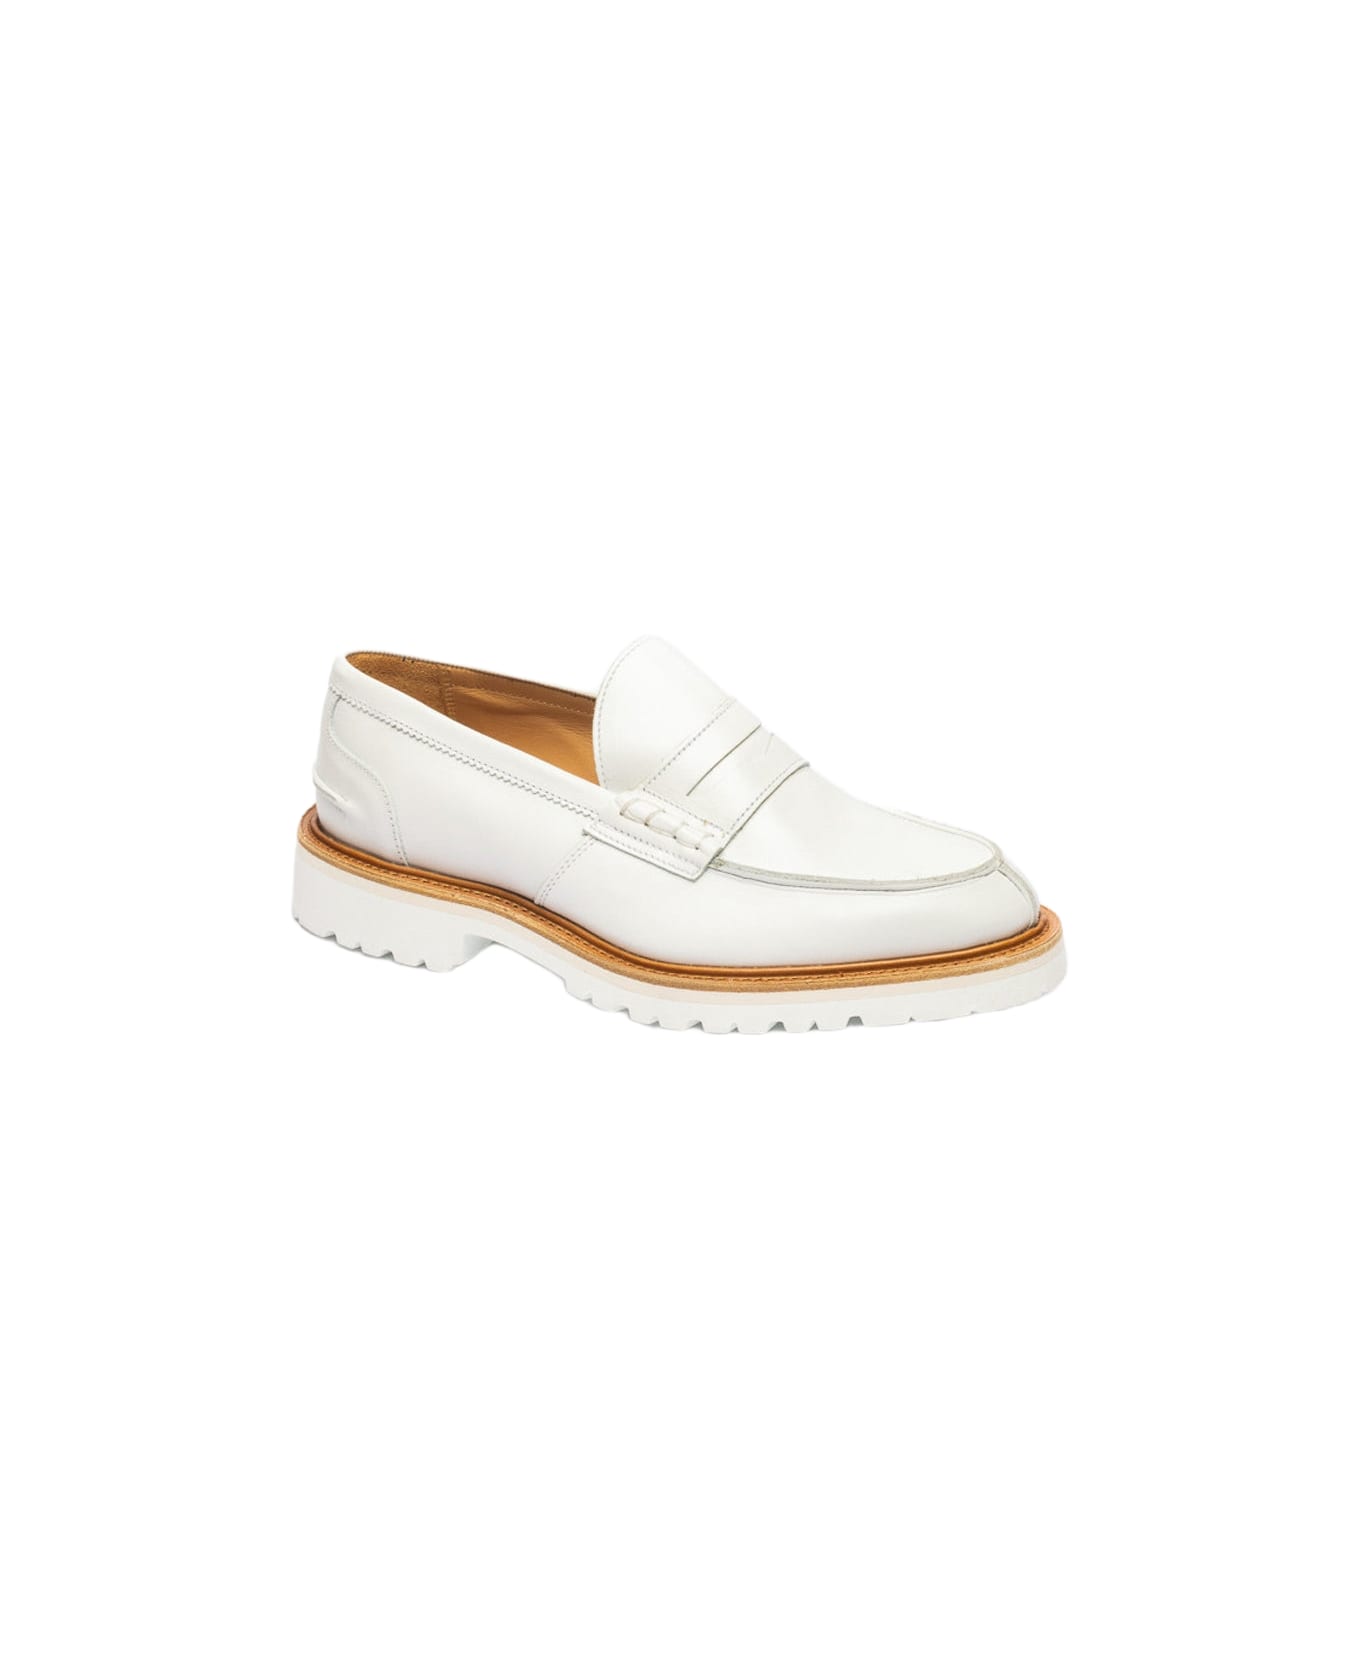 Tricker's White Calf Penny Loafer - Bianco